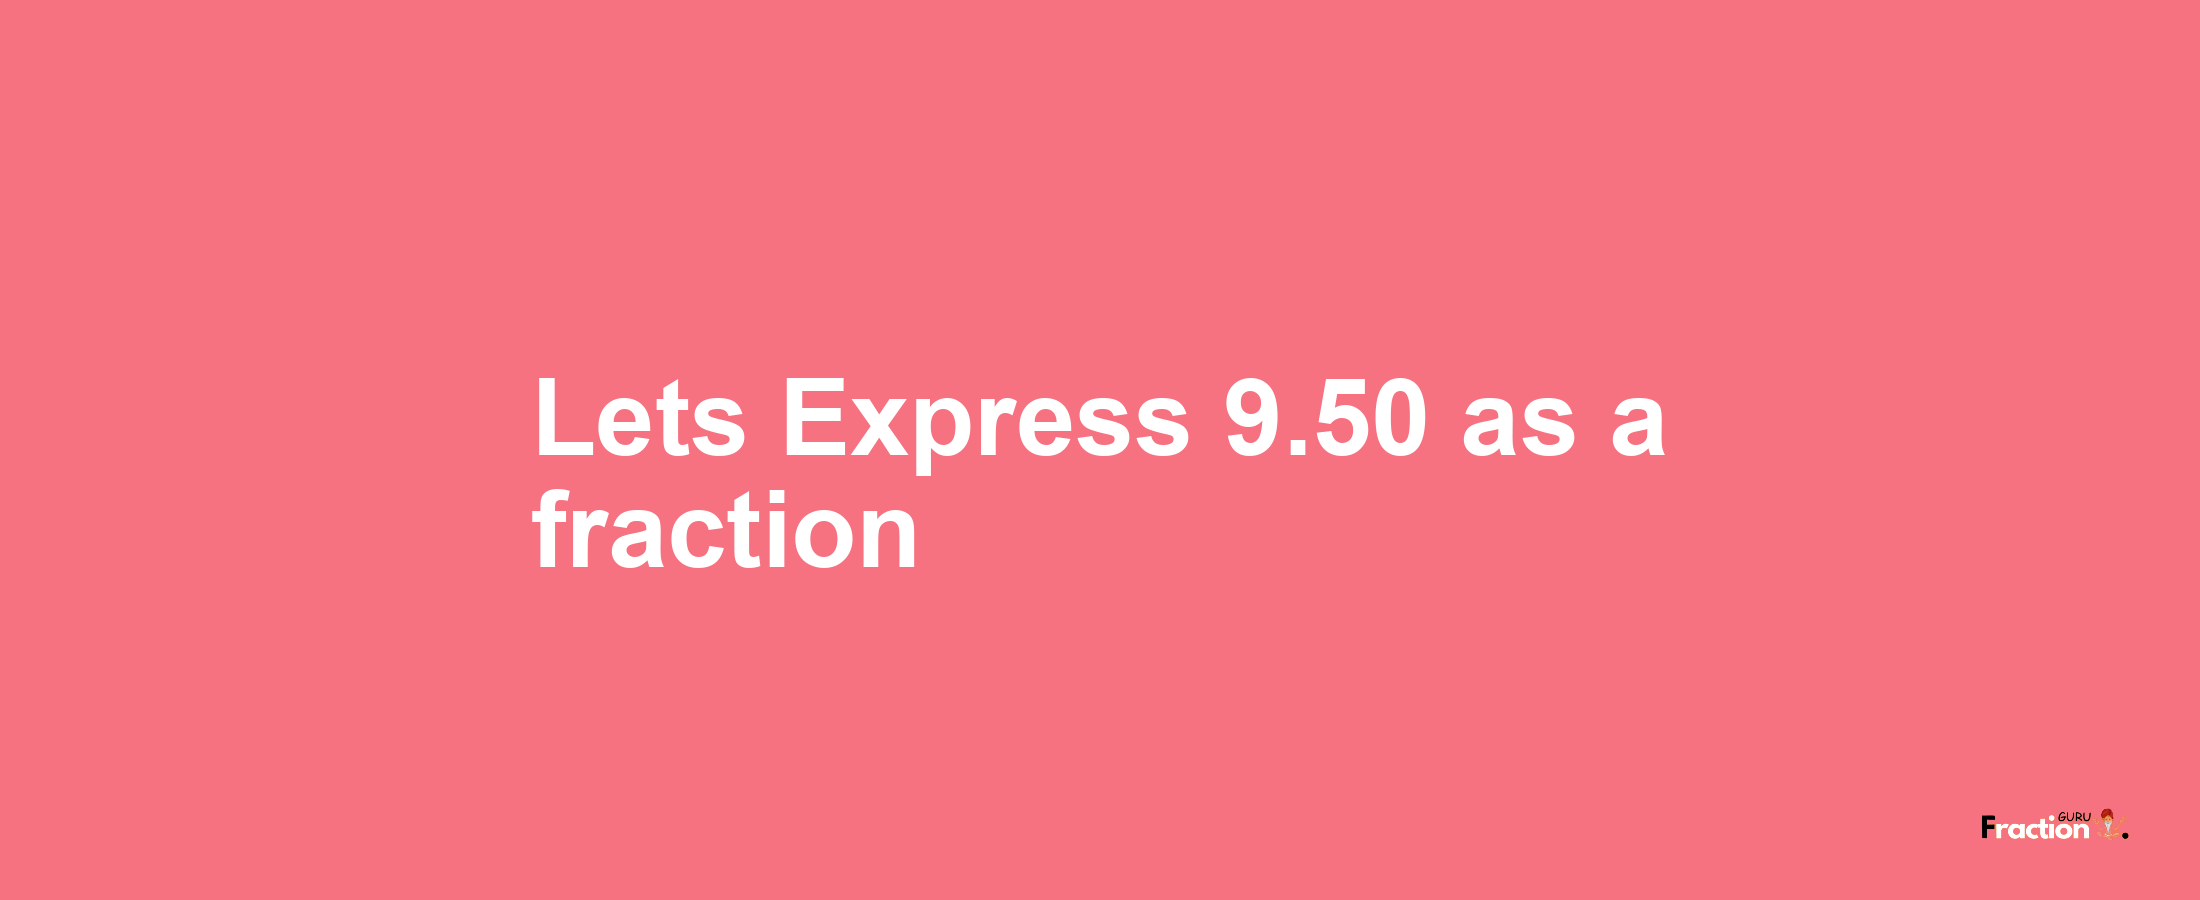 Lets Express 9.50 as afraction